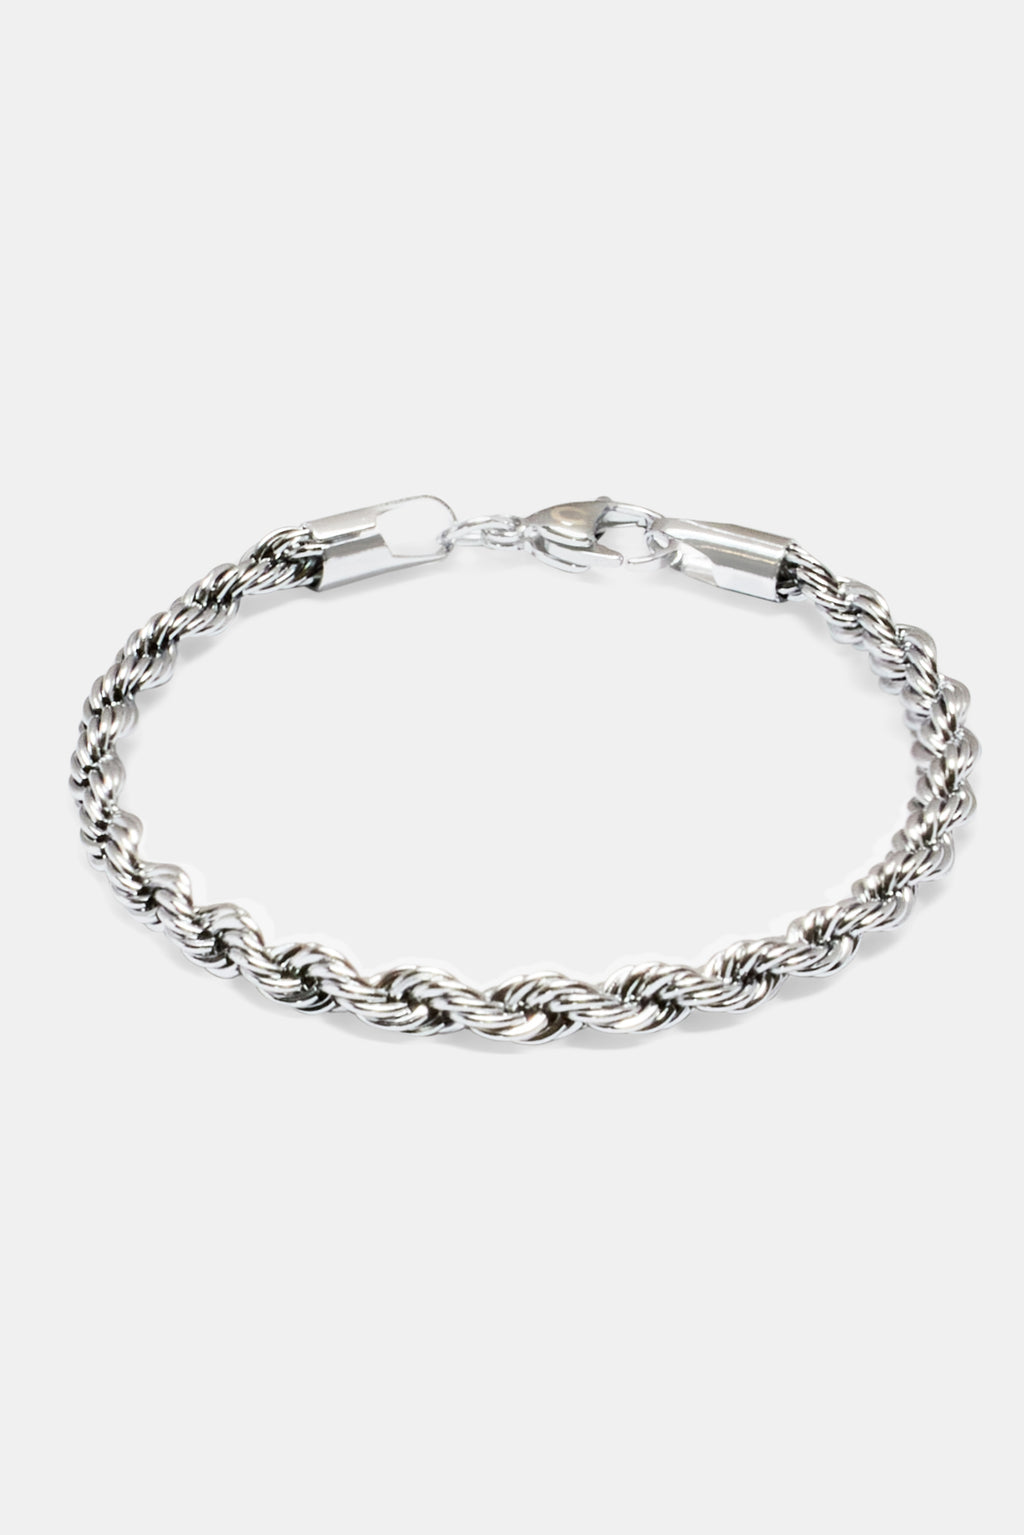 Double Knot Rope Chain Bracelet | BLINGG